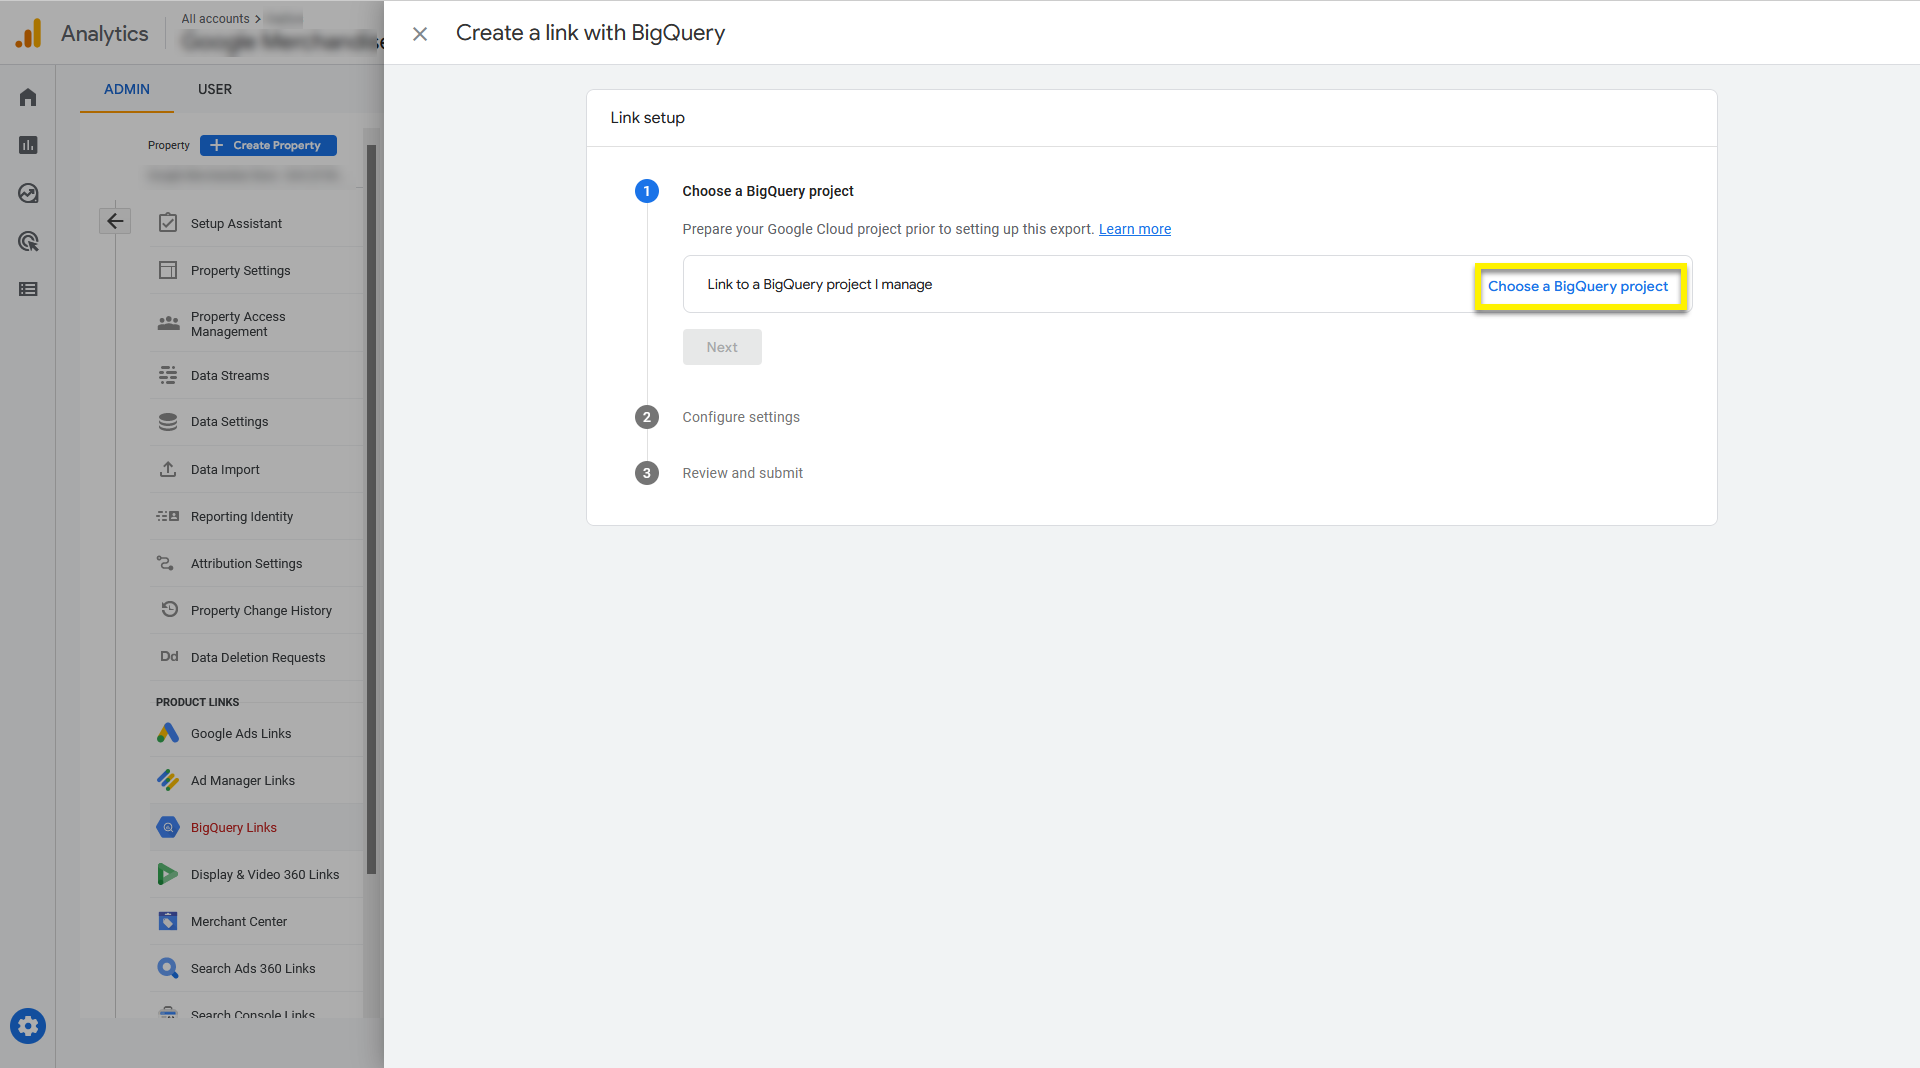 Step 22.4 Click ‘Choose a BigQuery project’ to display a list of projects